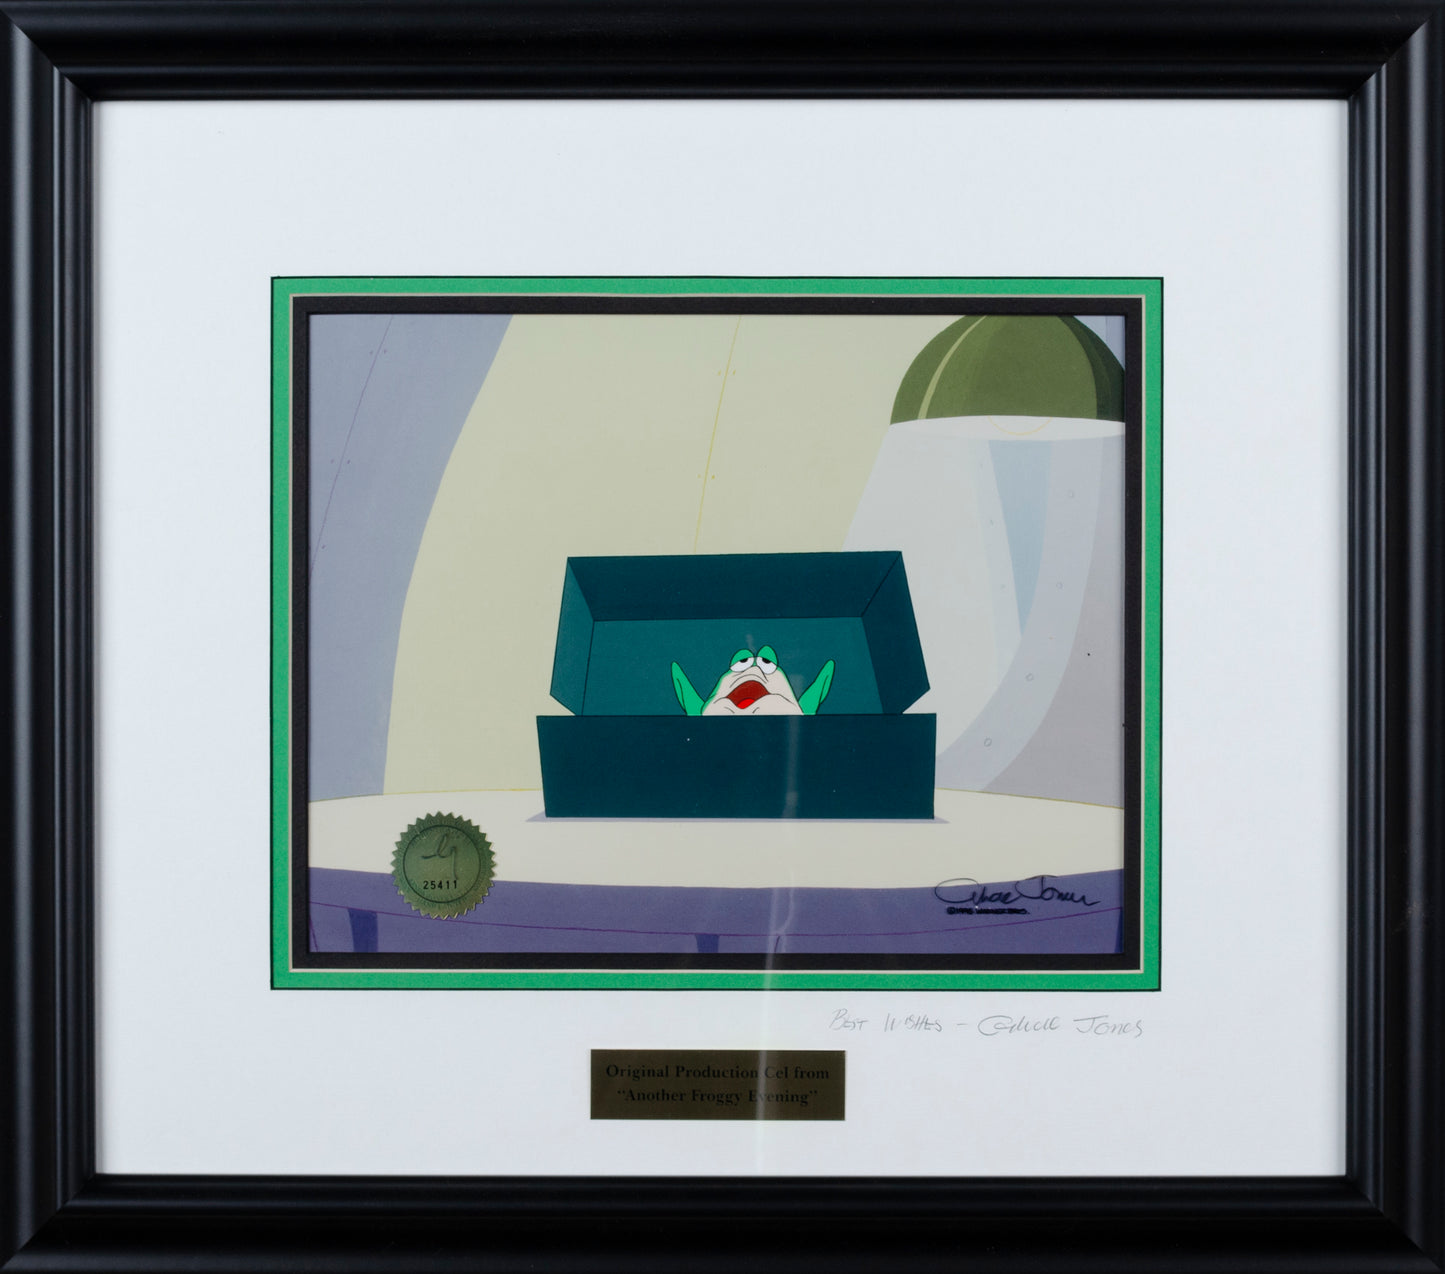 Original Production Cel from "Another Froggy Evening" Autographed by Chuck Jones